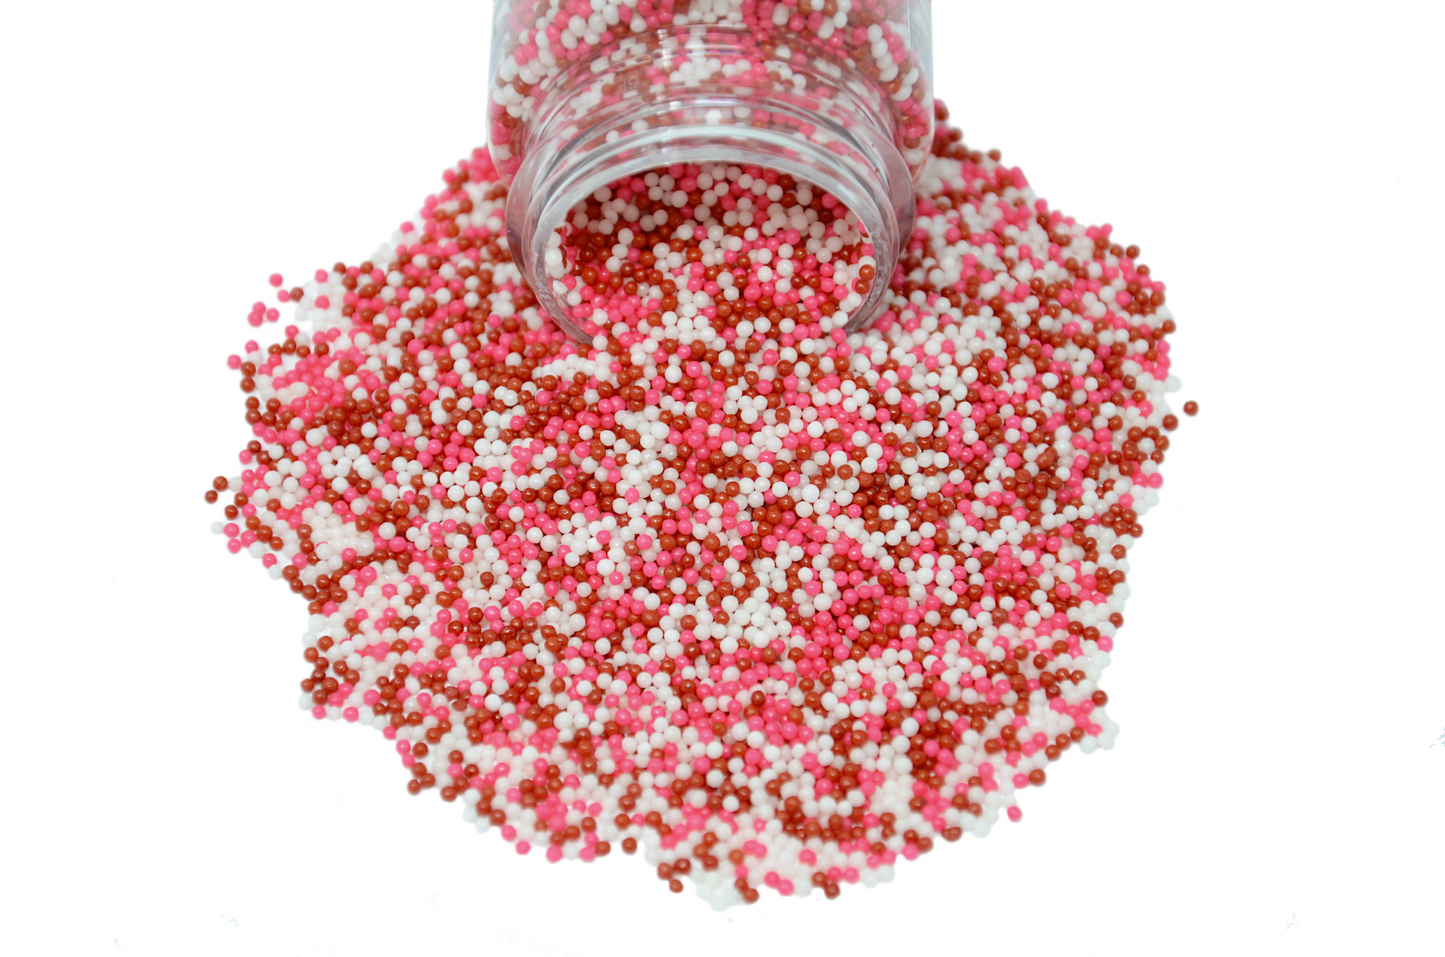 Load image into Gallery viewer, Lots of Love Valentines Nonpareils 3.8oz Bottle
